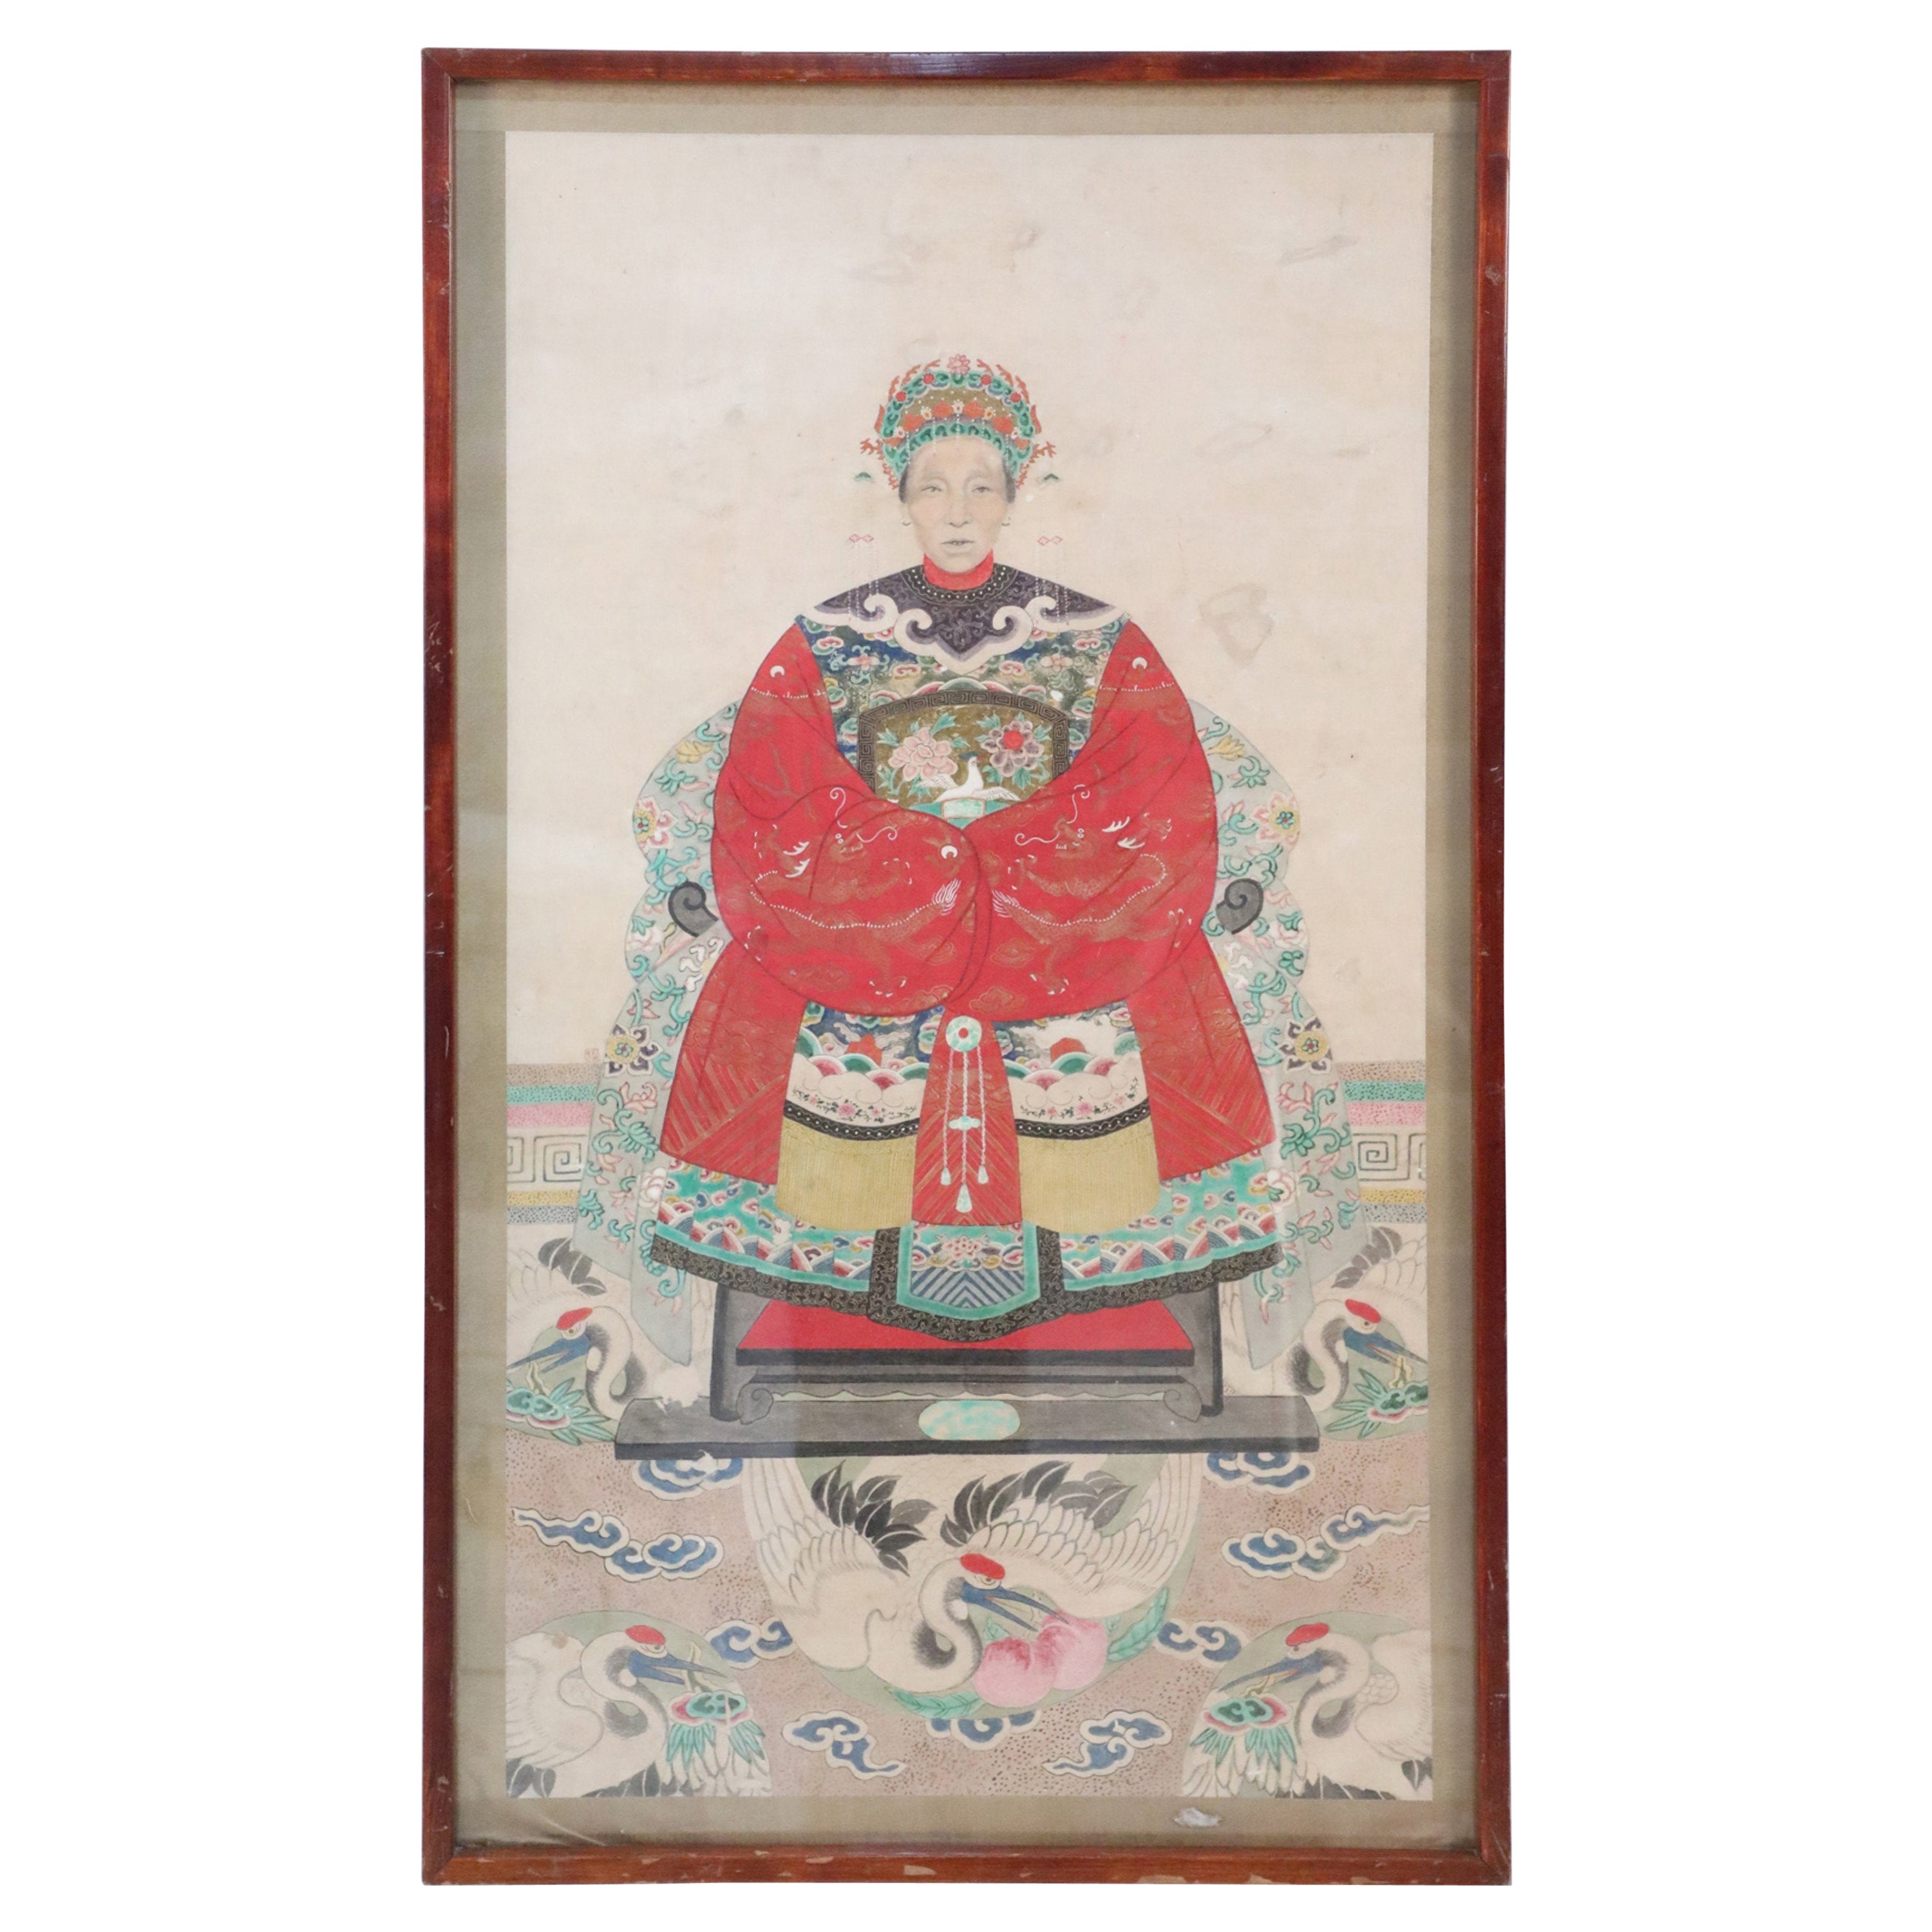 Framed Chinese Ancestor Portrait Print with Red Robes